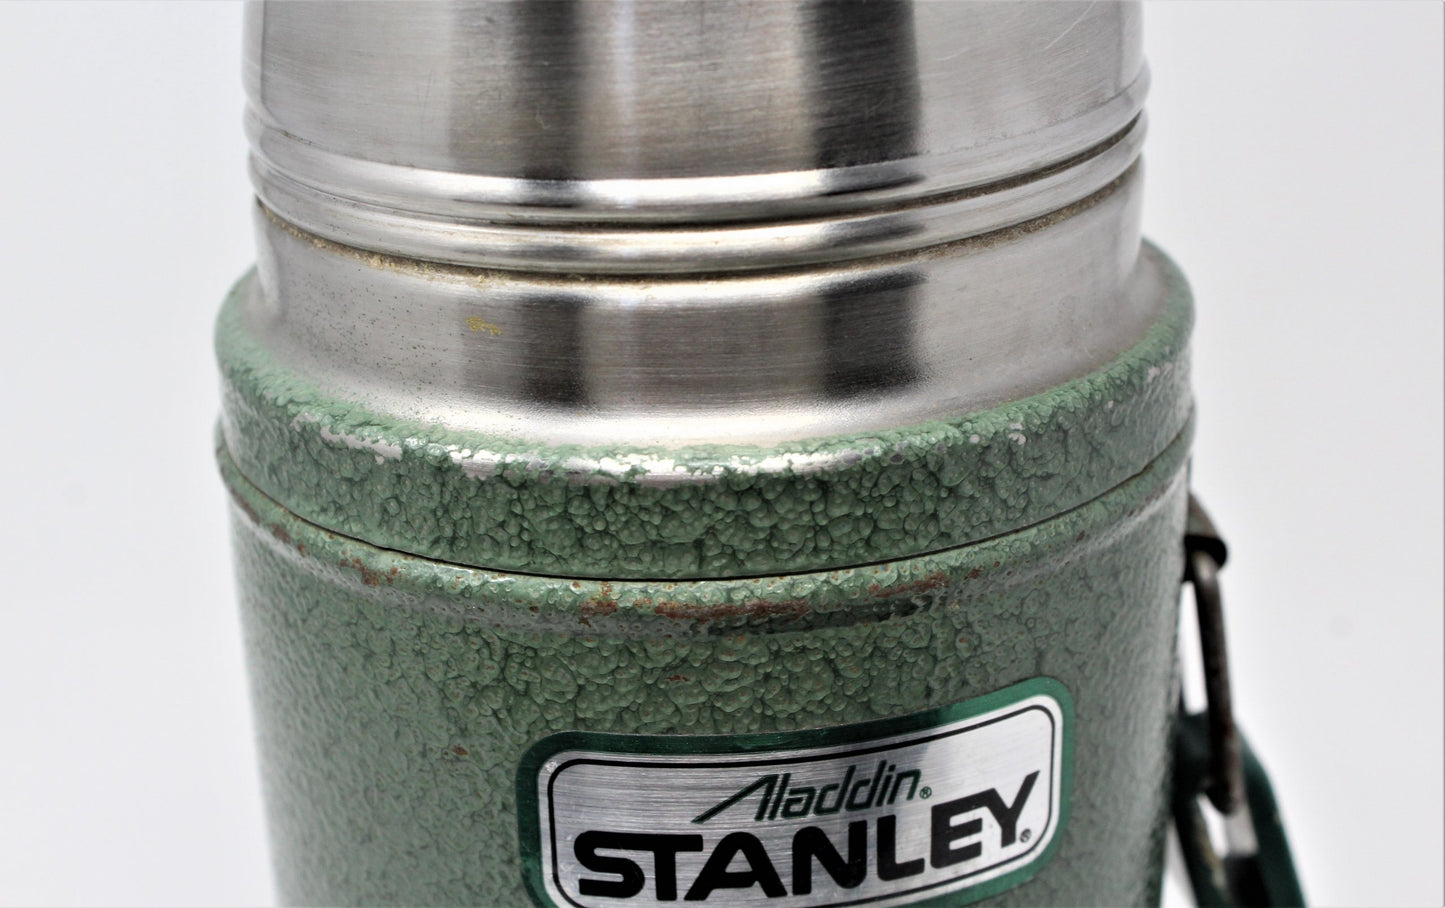 Thermos, Aladdin / Stanley Wide Mouth, Hammertone Green, Vintage 1995, SOLD